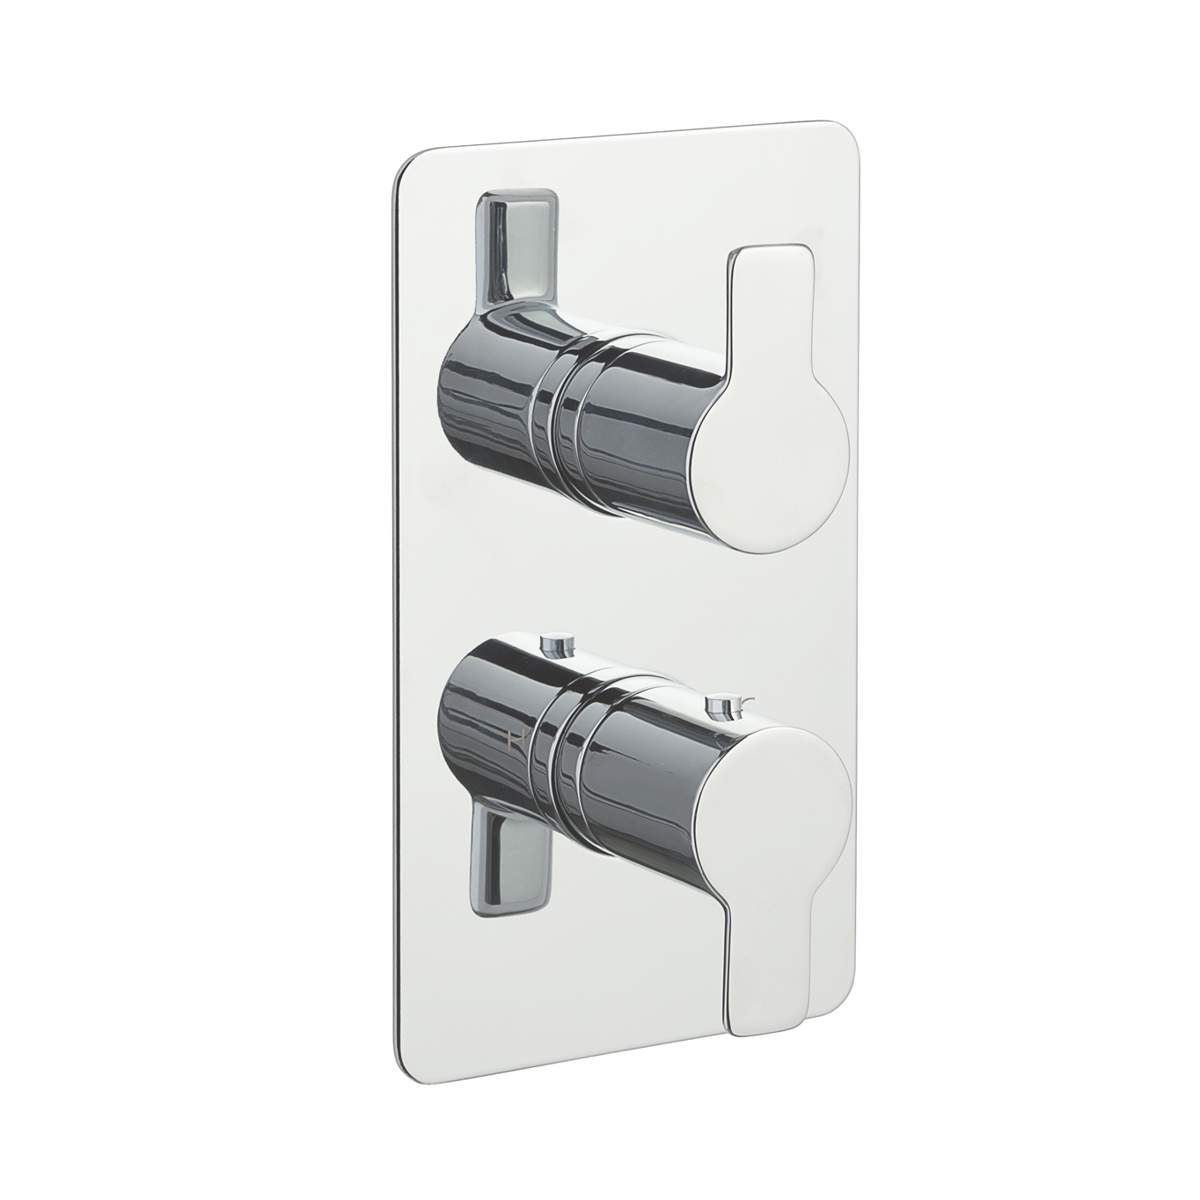 JTP Amore 2 Outlet Thermostat